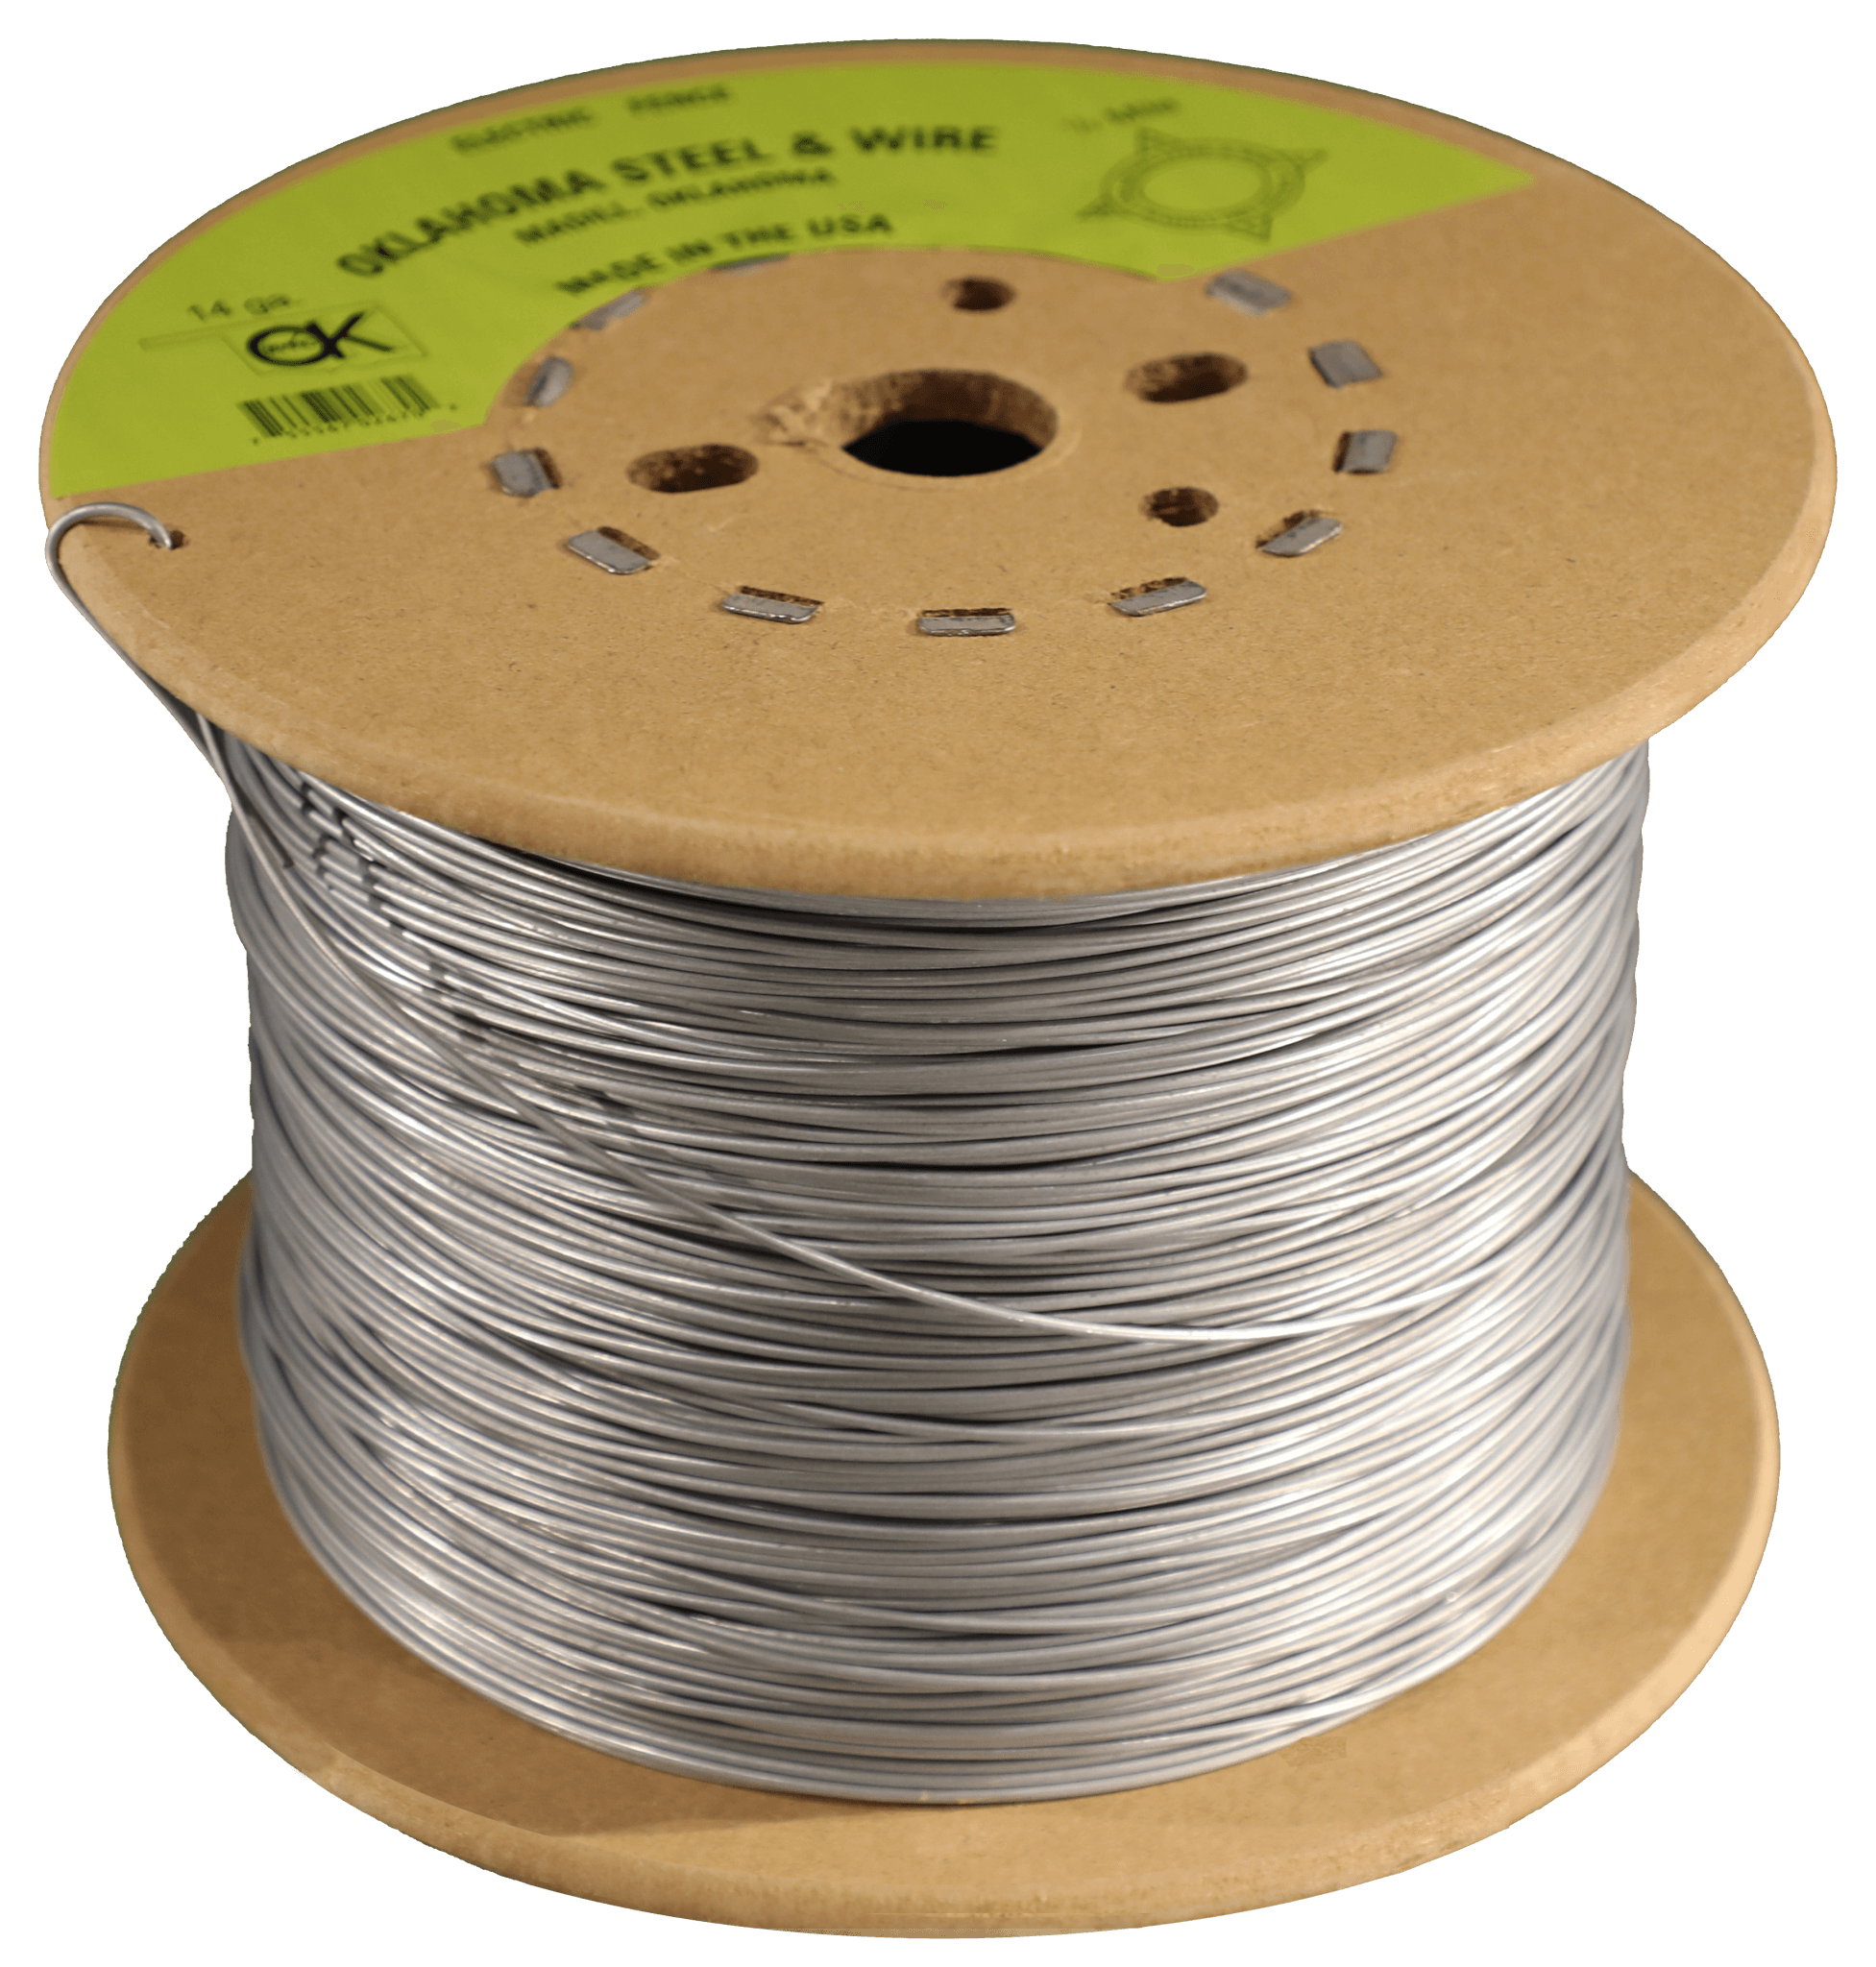 Red Brand 85611 Electric Fence Wire 14 ga Wire 1/2 mile LSteel Galvanized